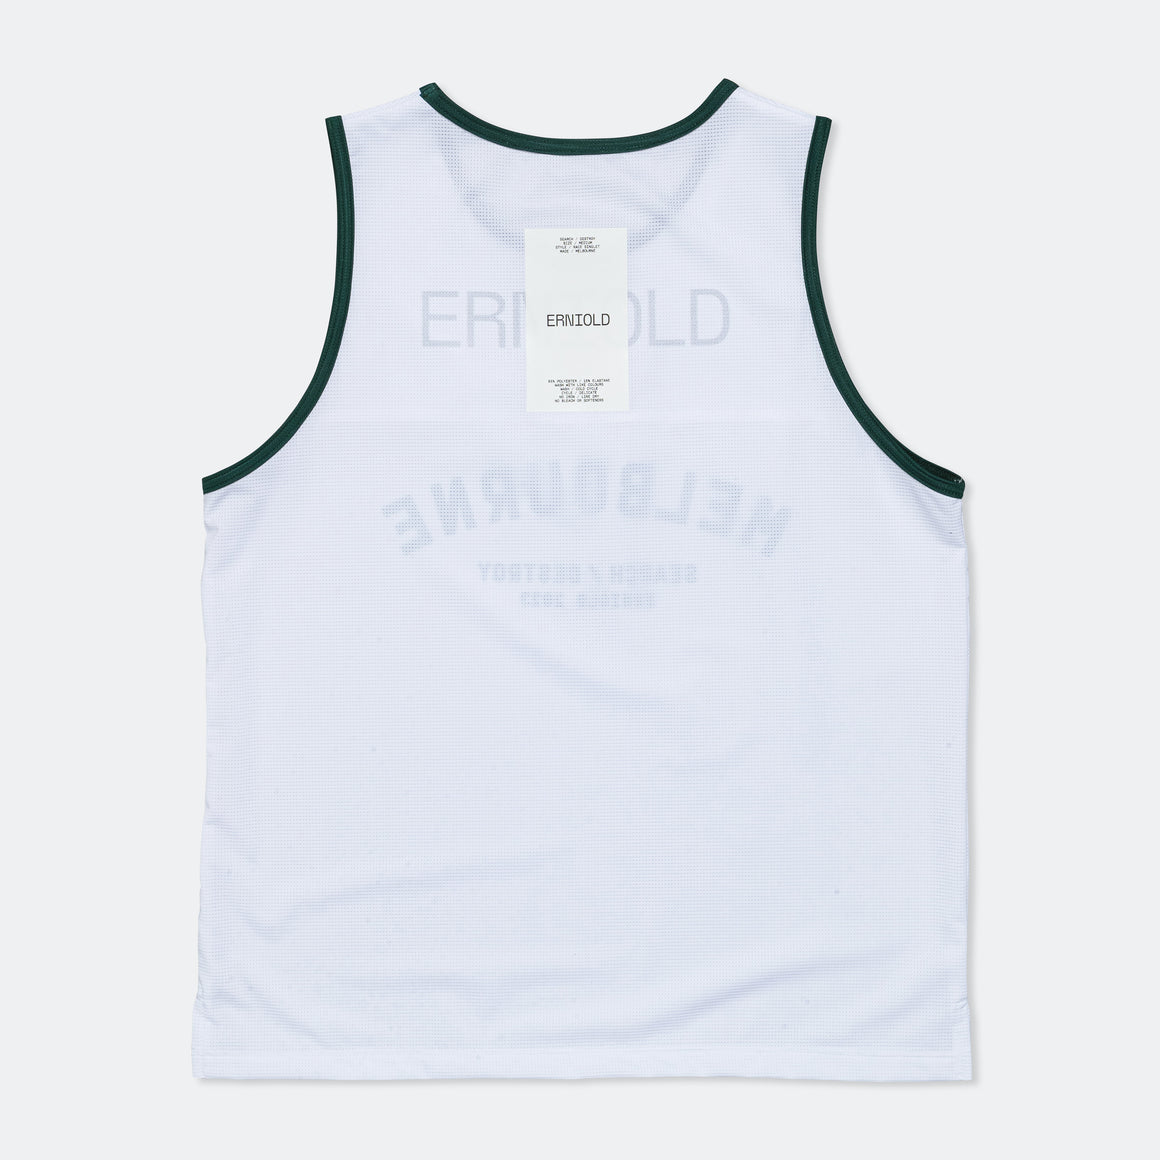 Erniold - Womens Melbourne Race Singlet - White - Up There Athletics